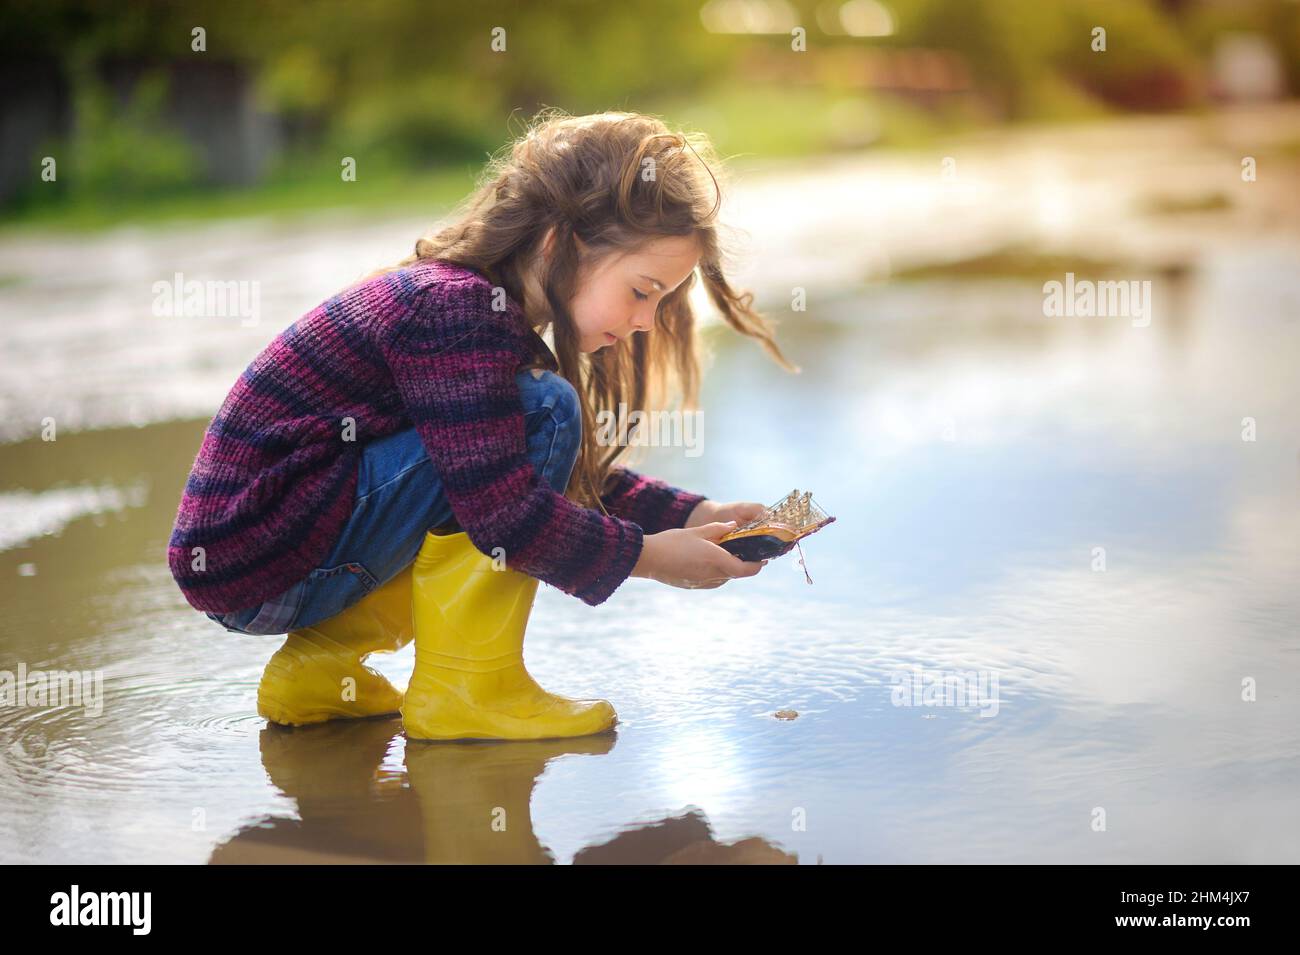 cute little girl in yellow boots plays in a puddle with a wooden boat, childhood, autumn concept Stock Photo